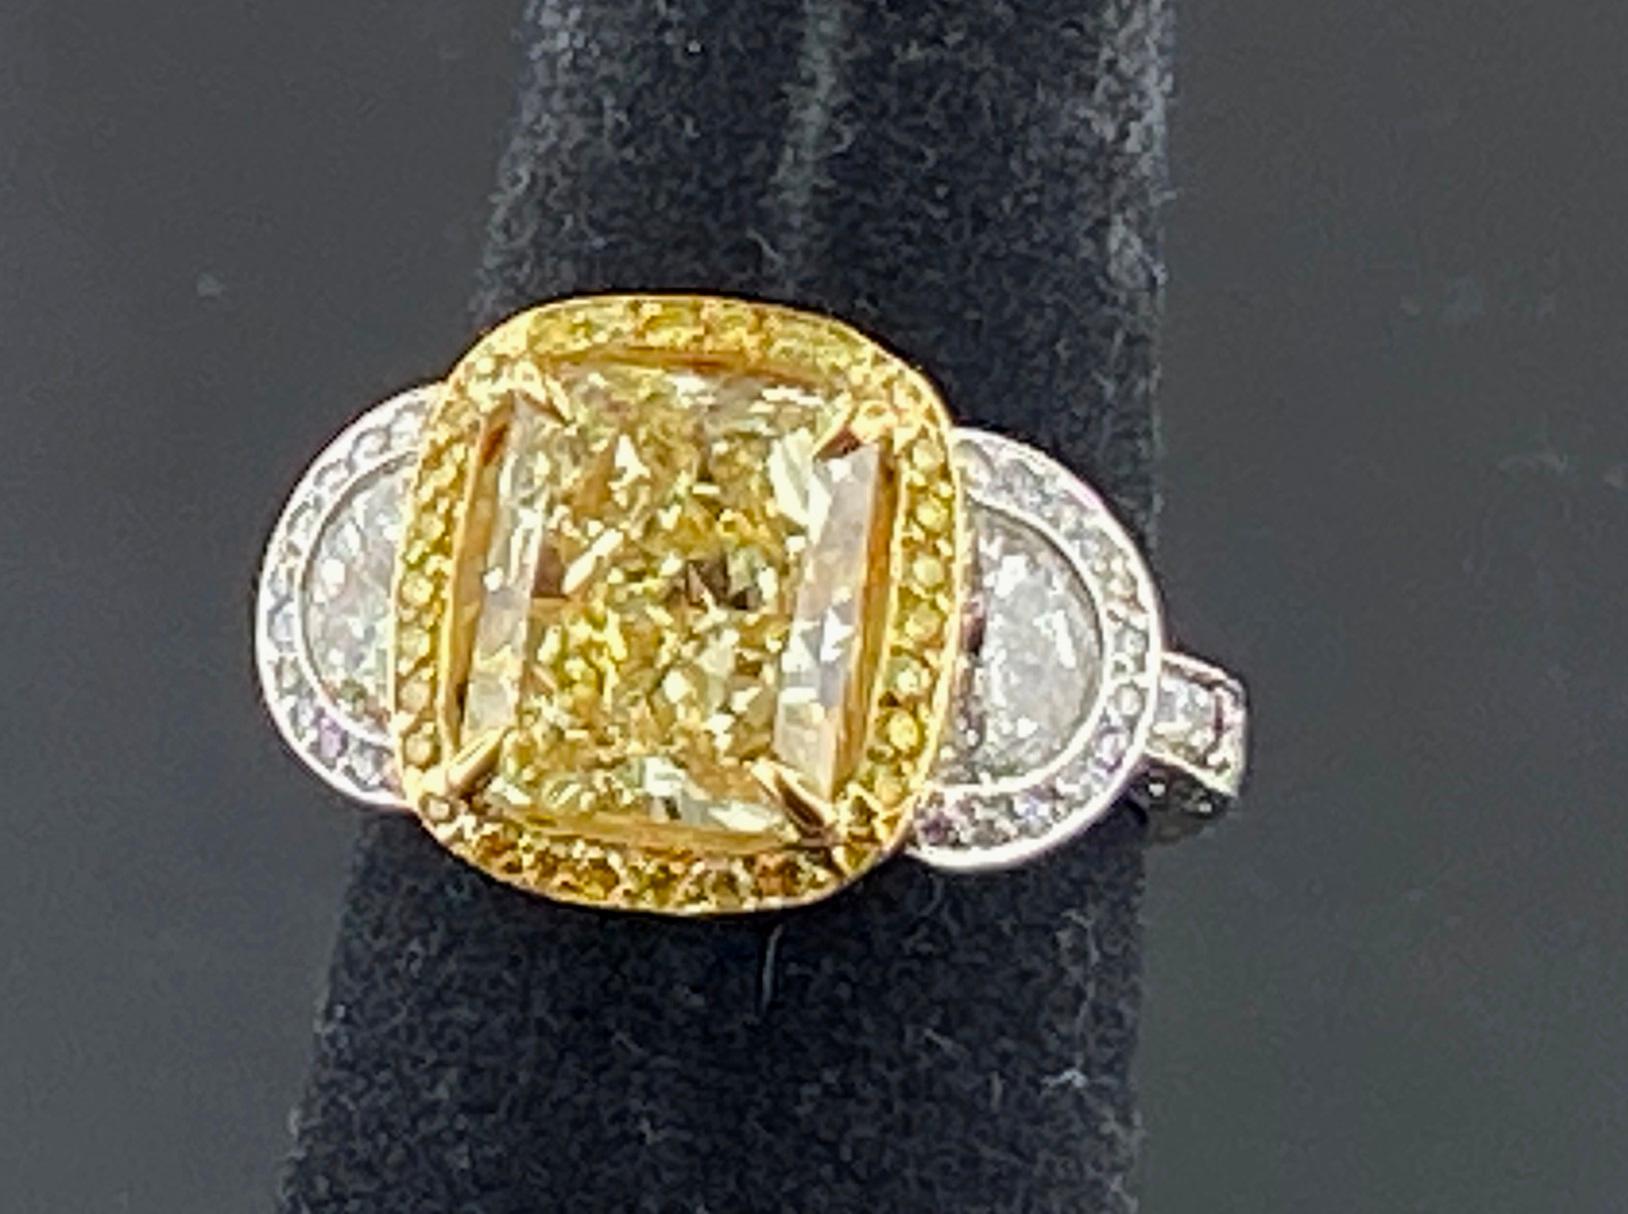 Set in Platinum and 18 karat yellow gold, weighing 11 grams, is a 3.74 carat Radiant Cut Fancy Yellow diamond, Clarity Grade of: VVS-2.  Surrounding the center diamond are 88 Fancy Yellow Round Brilliant Cut diamonds with a total weight of 0.45